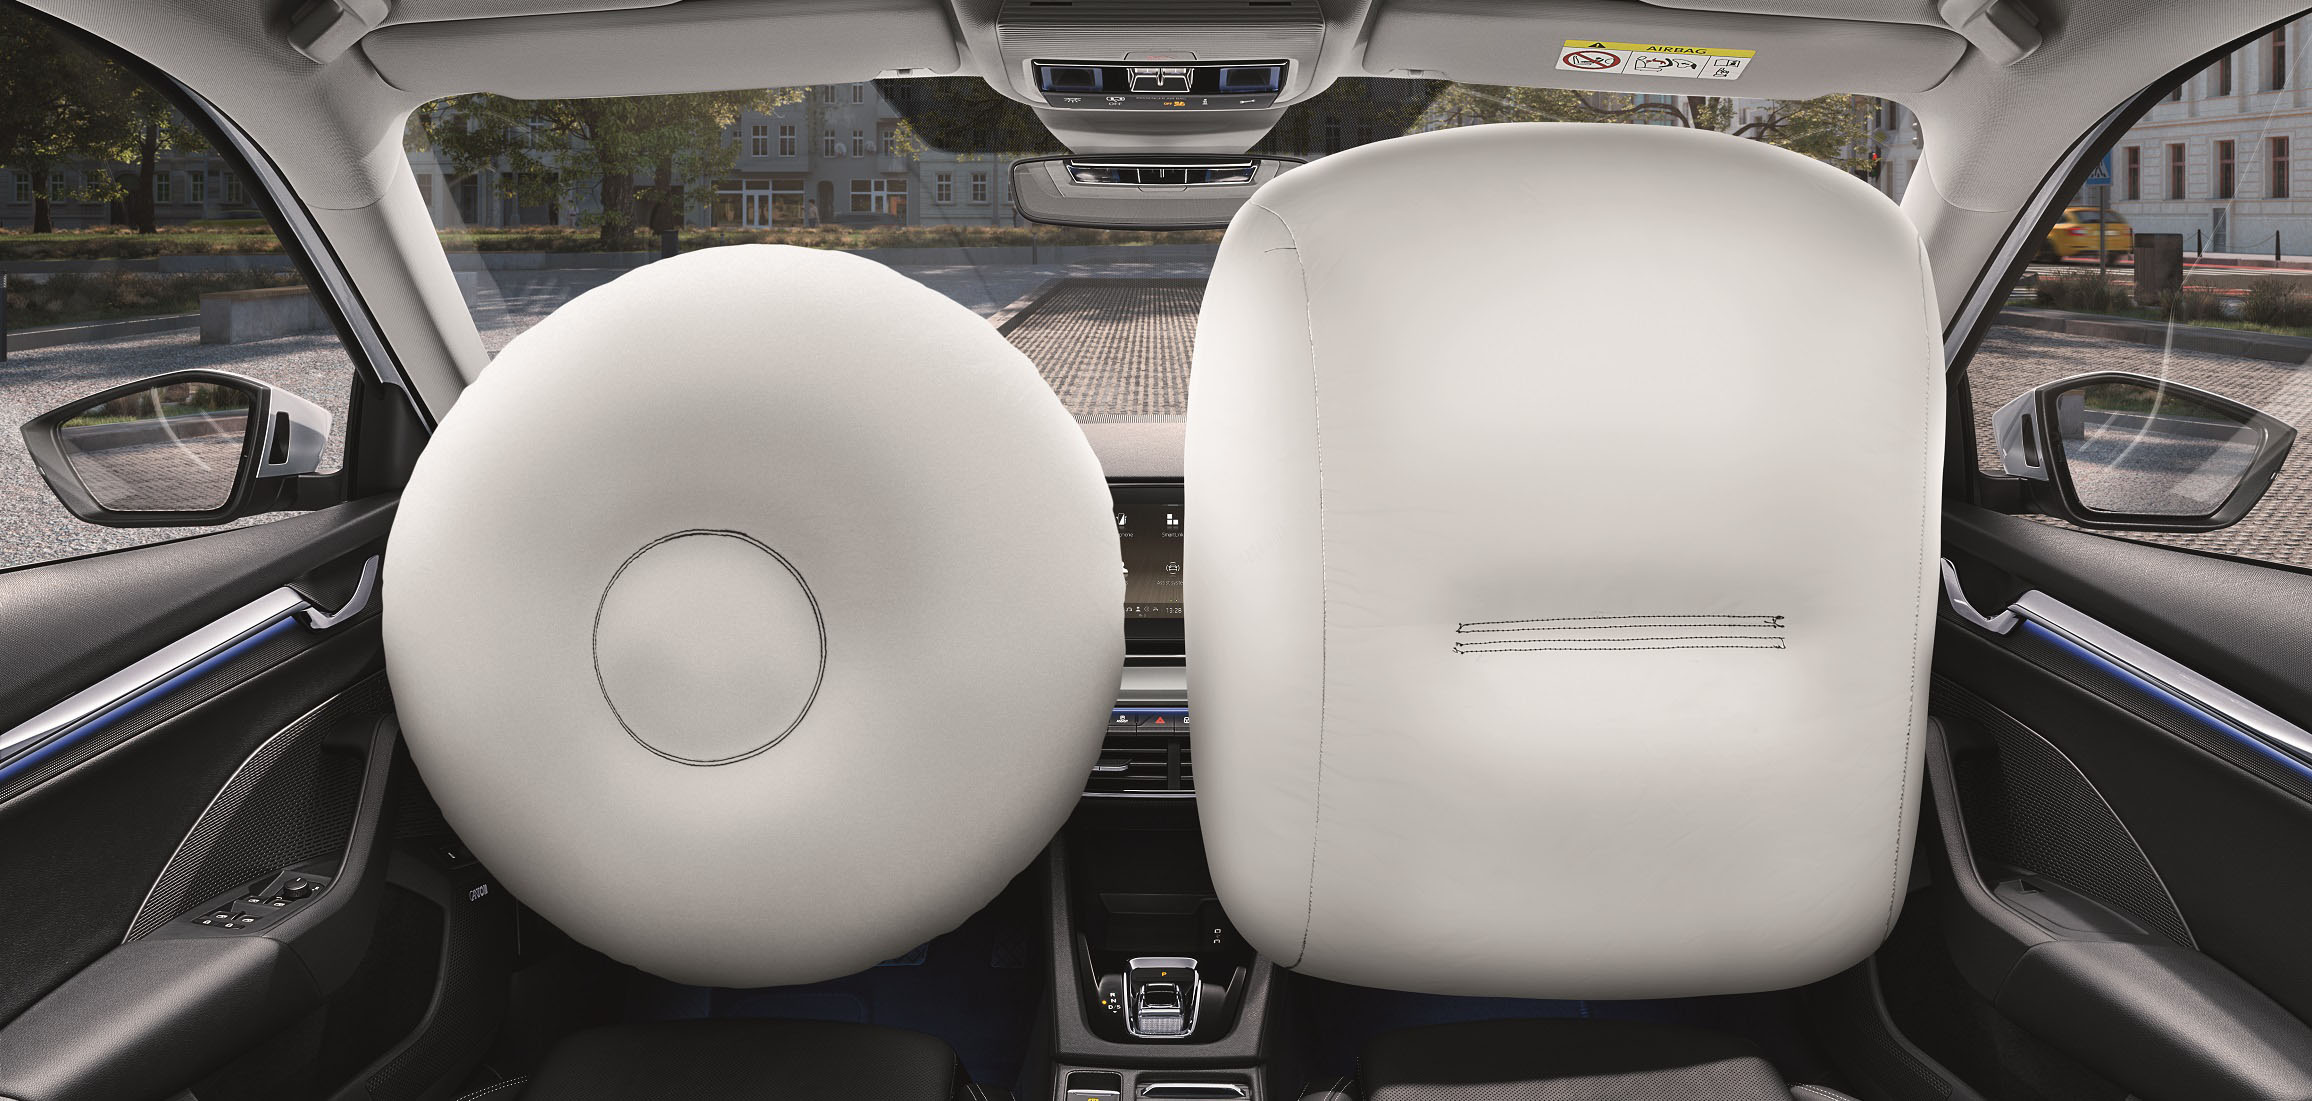 recall-actions-m22-airbag_583770cd